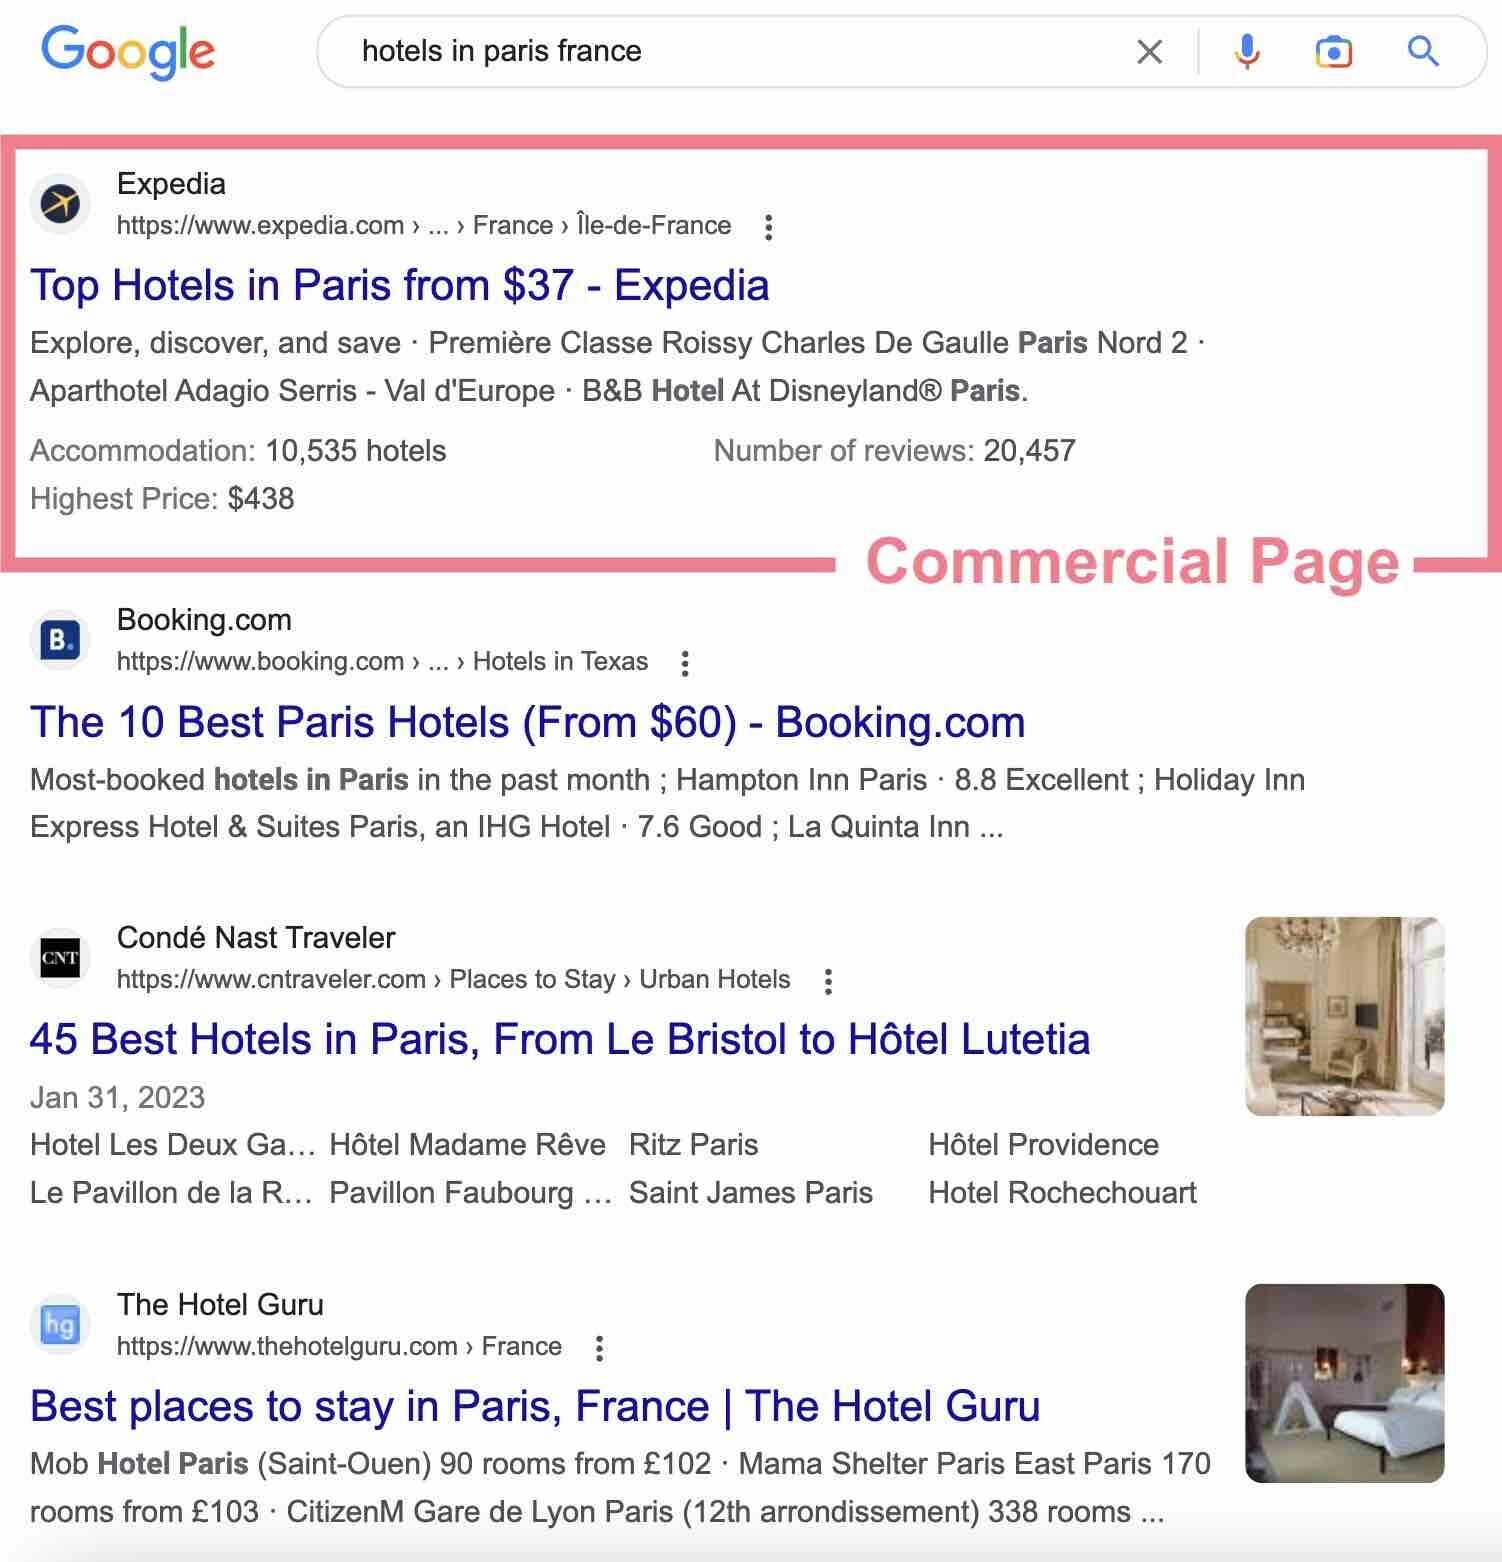 hotels in Paris france commercial page google search